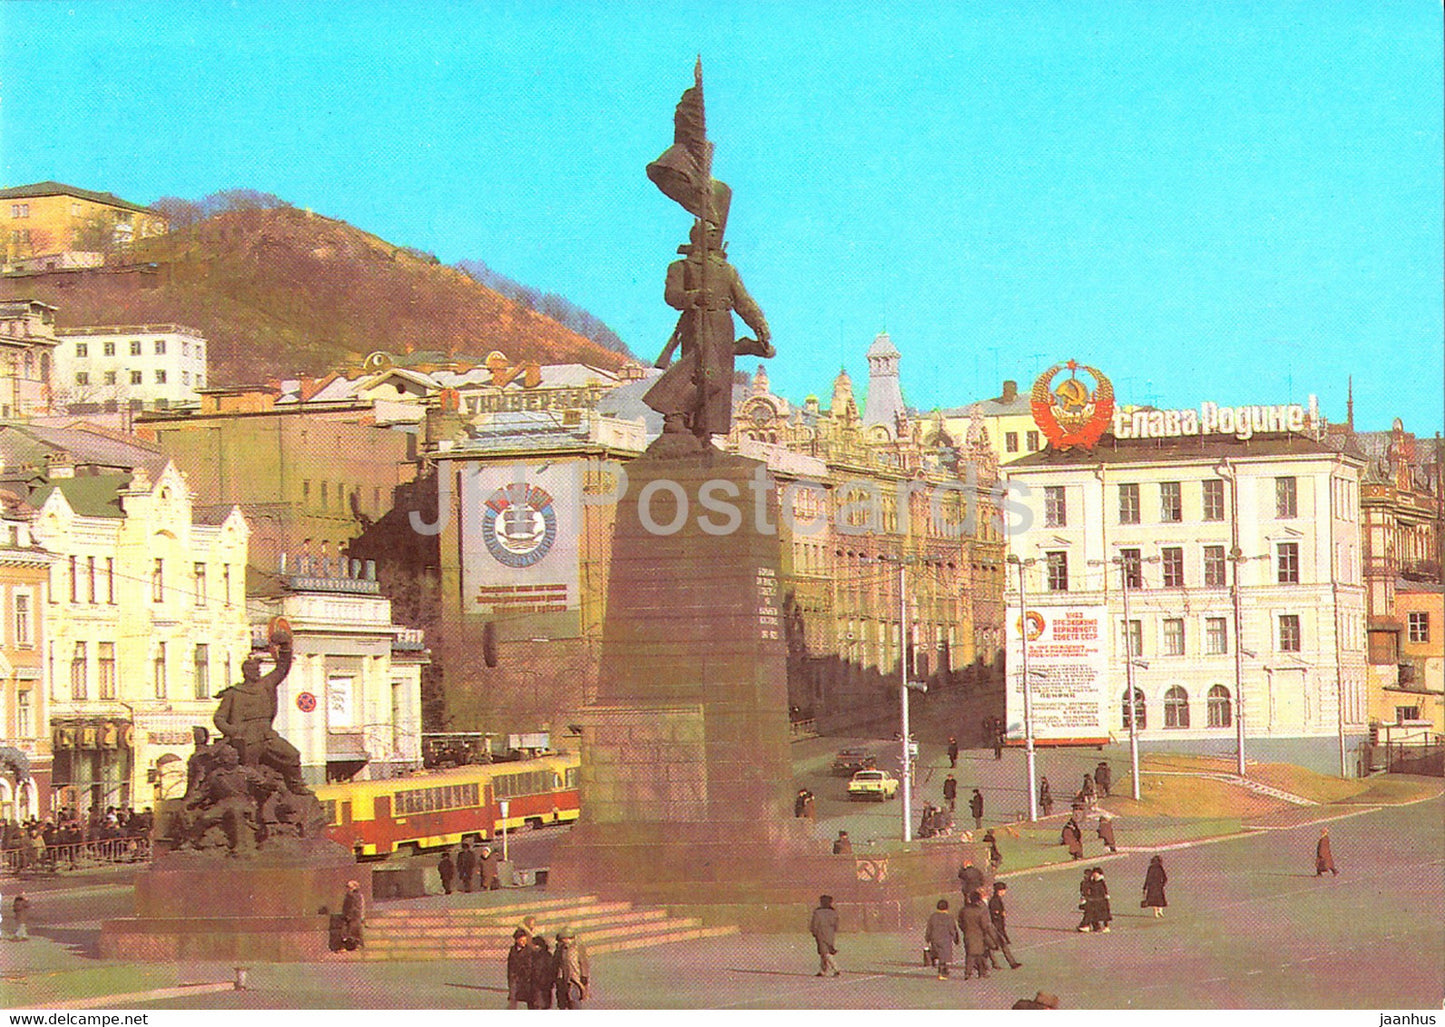 Vladivostok - monument to the fighters for Soviet power - tram - postal stationery - 1988 - Russia USSR - unused - JH Postcards